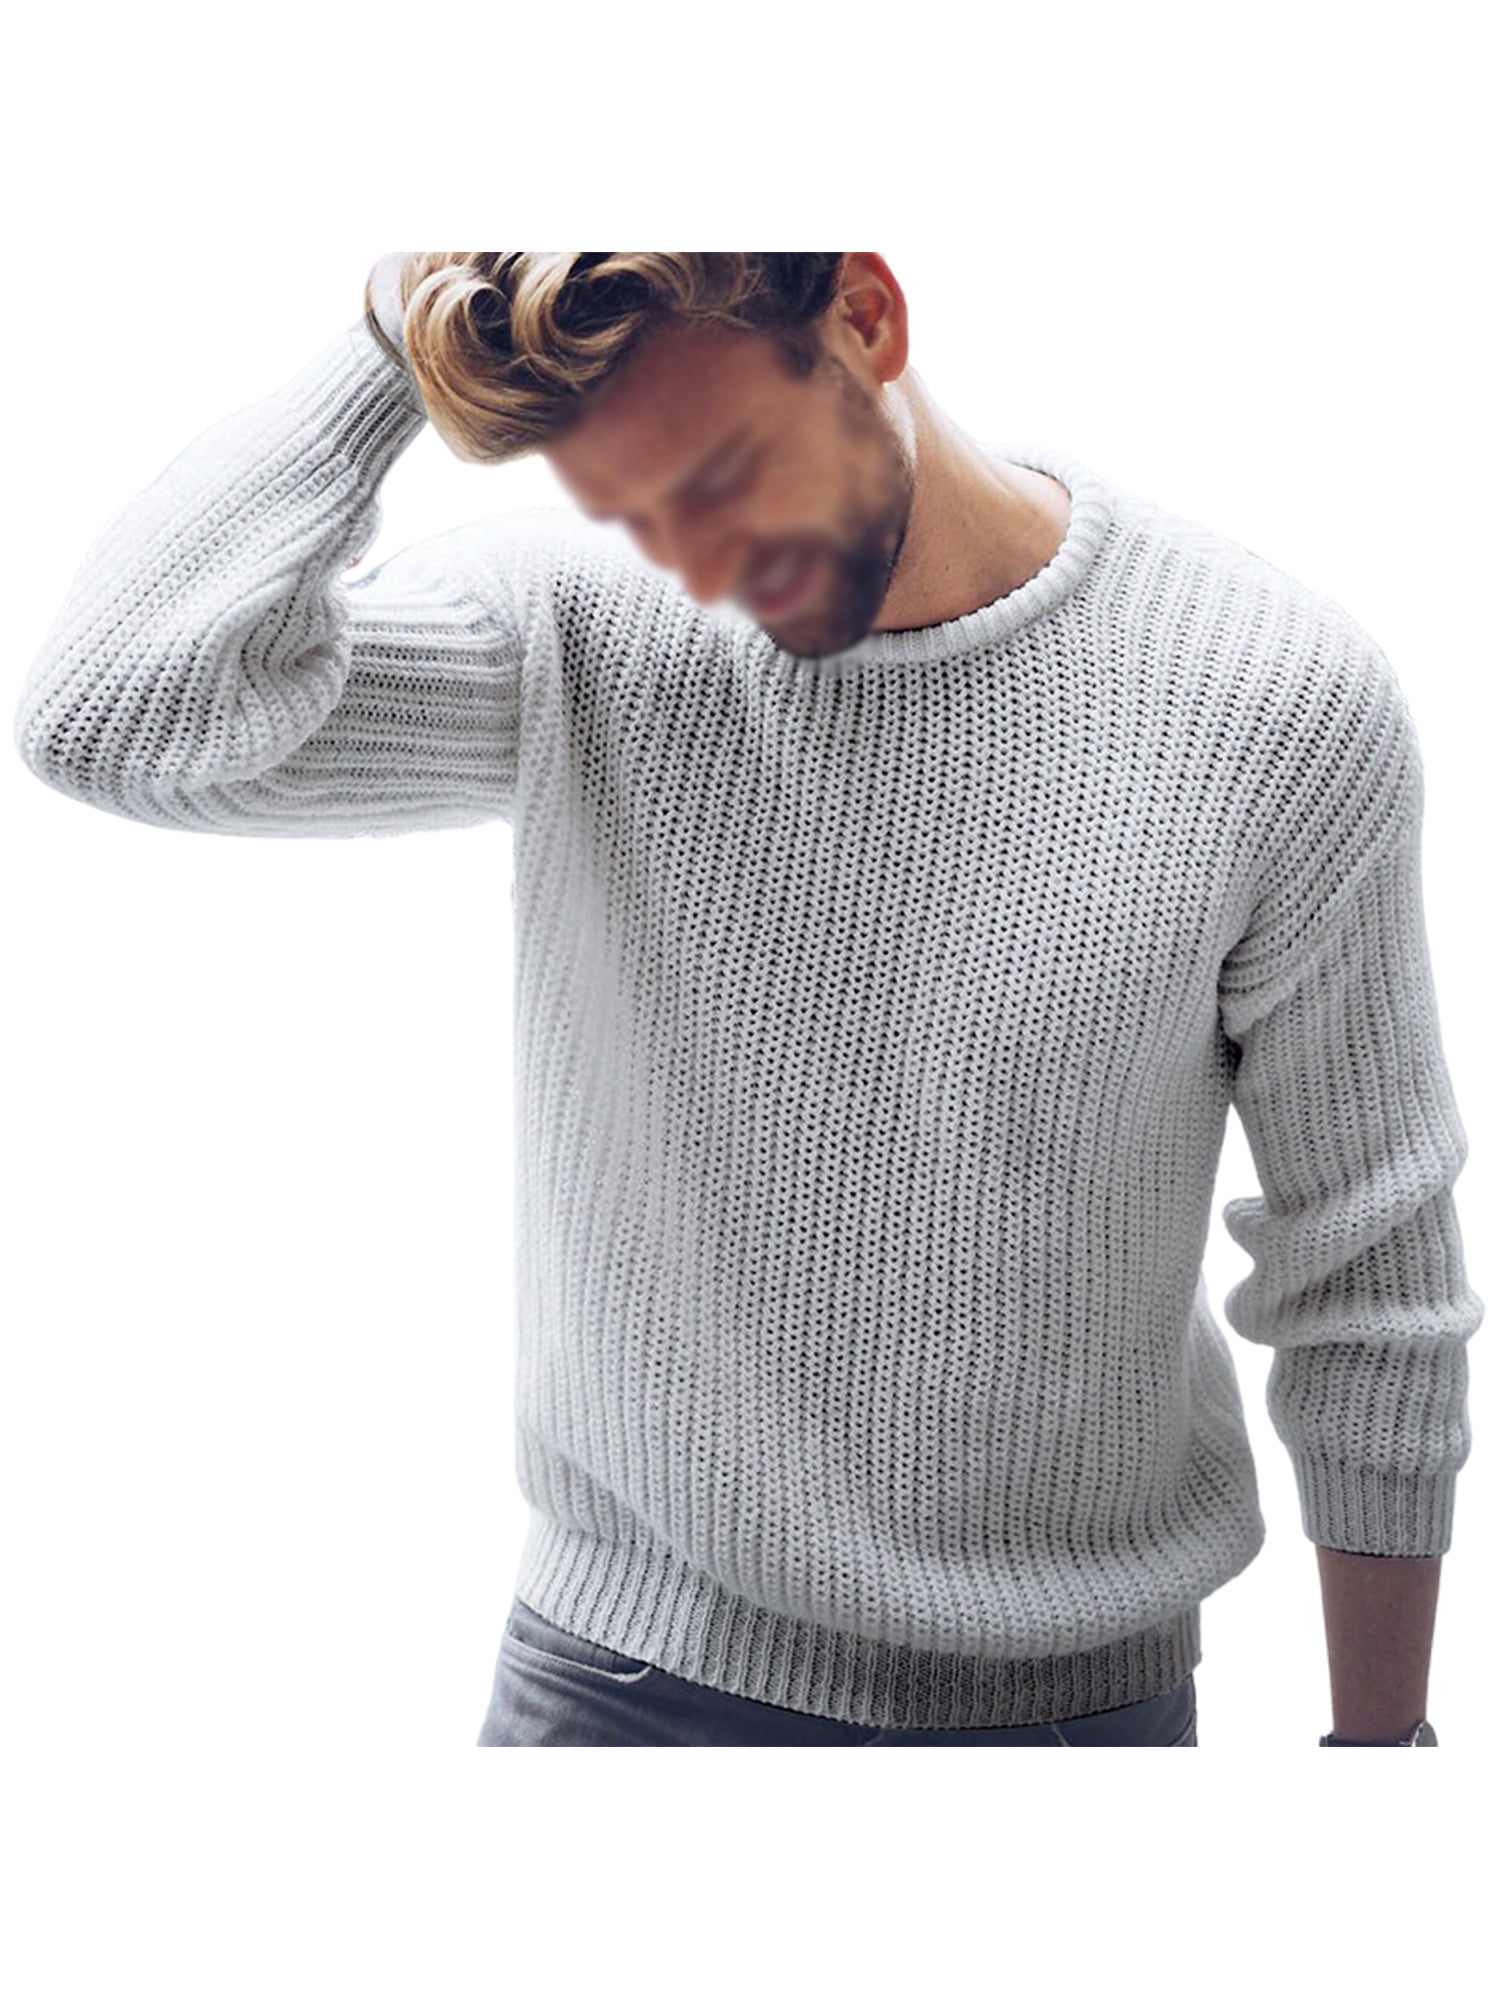 Jumper Knitwear Tops Pullover Sweater Knit Shirt Casual T-Shirt Knitted Mens 